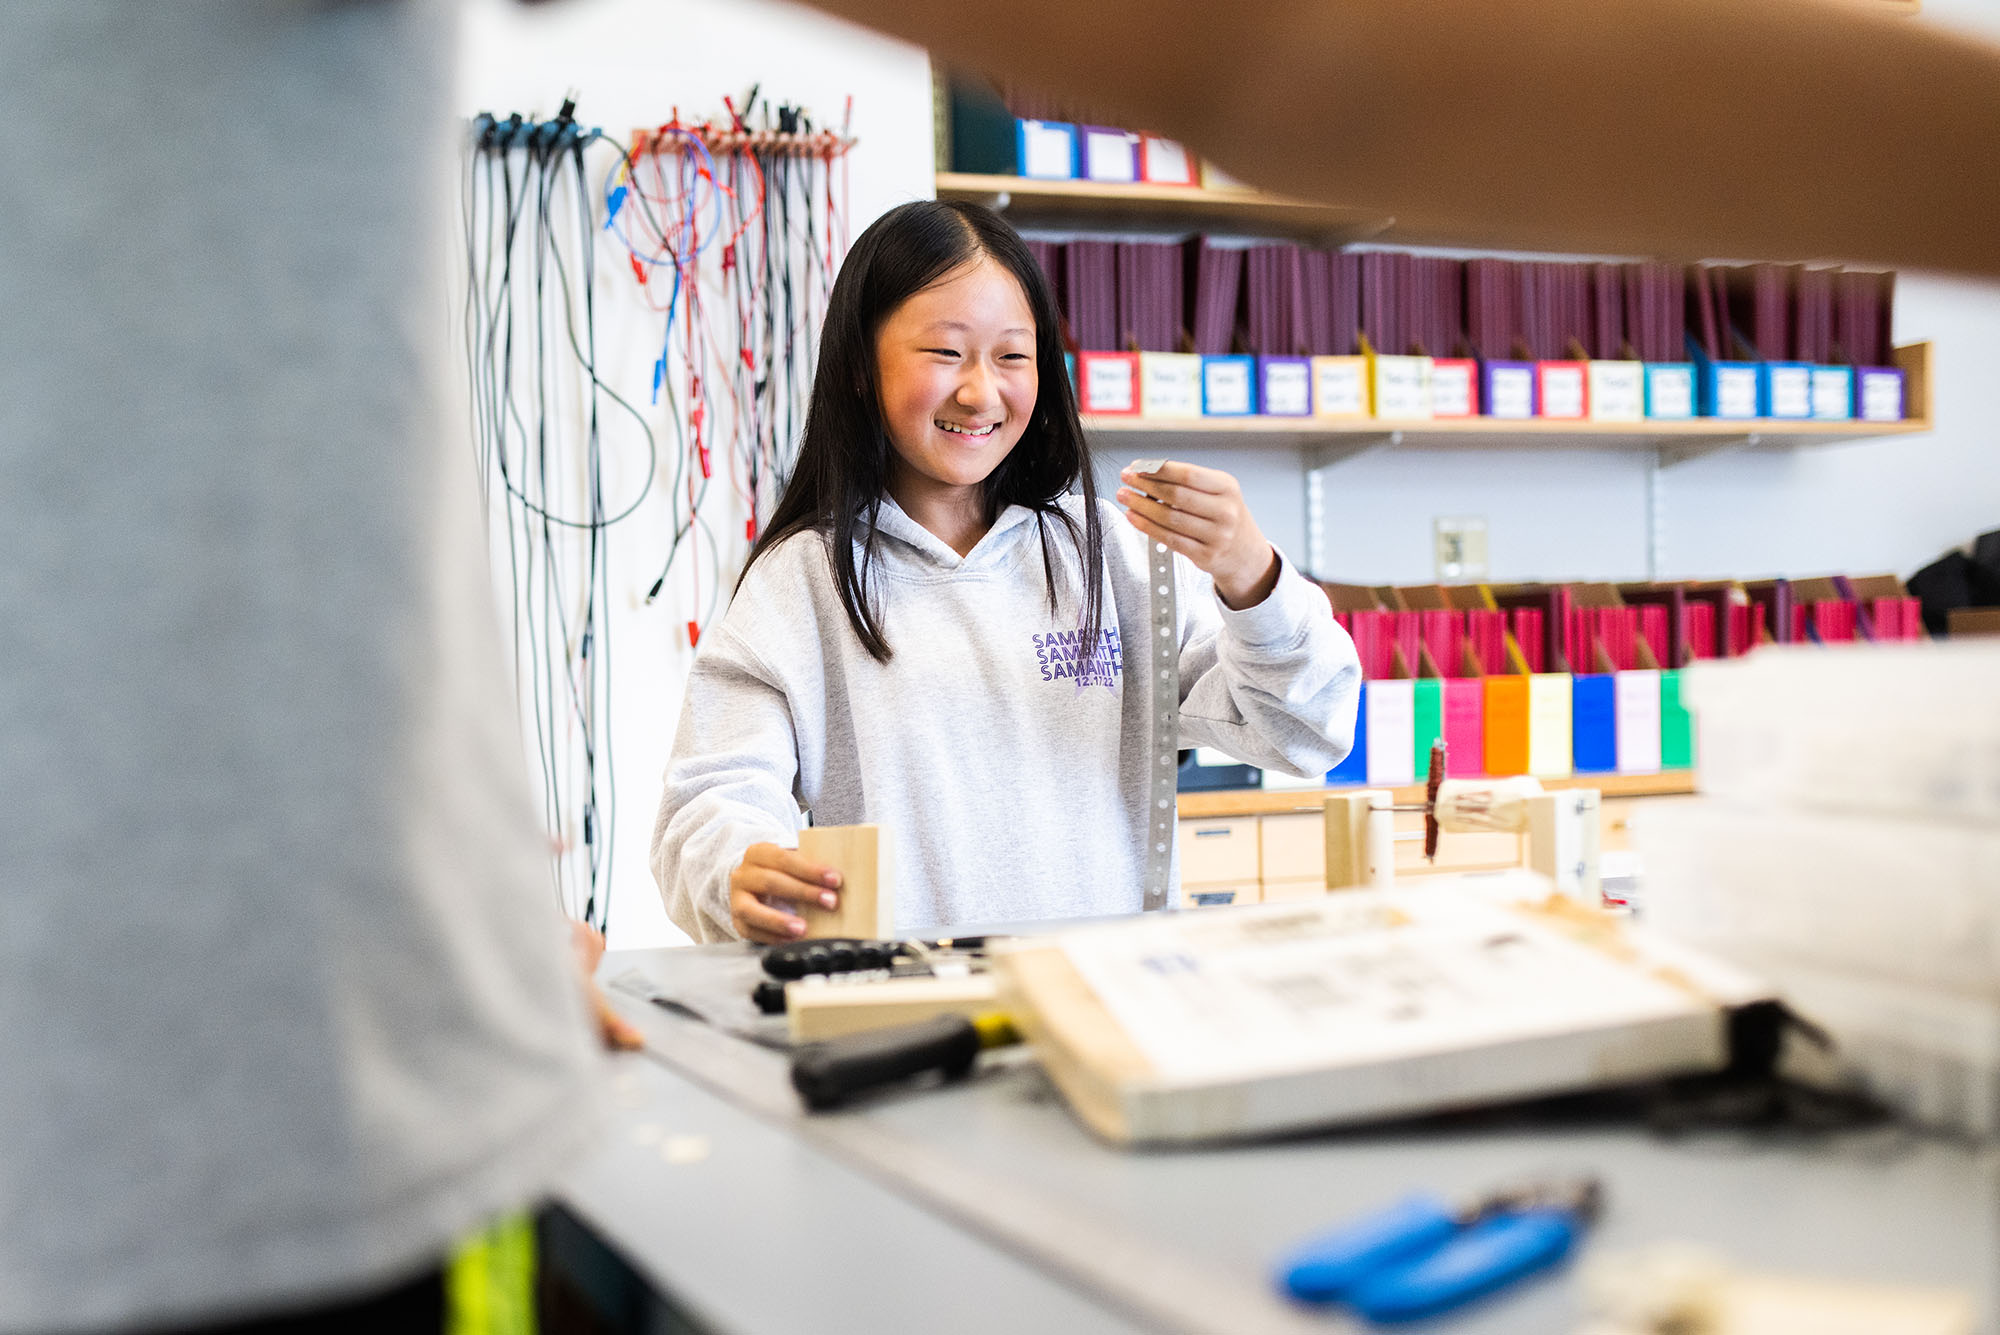 Photo: A young asian girl smiles and holds up a metal strip in a college-run program where she investigates more about STEM. She wears a gray hoodie.